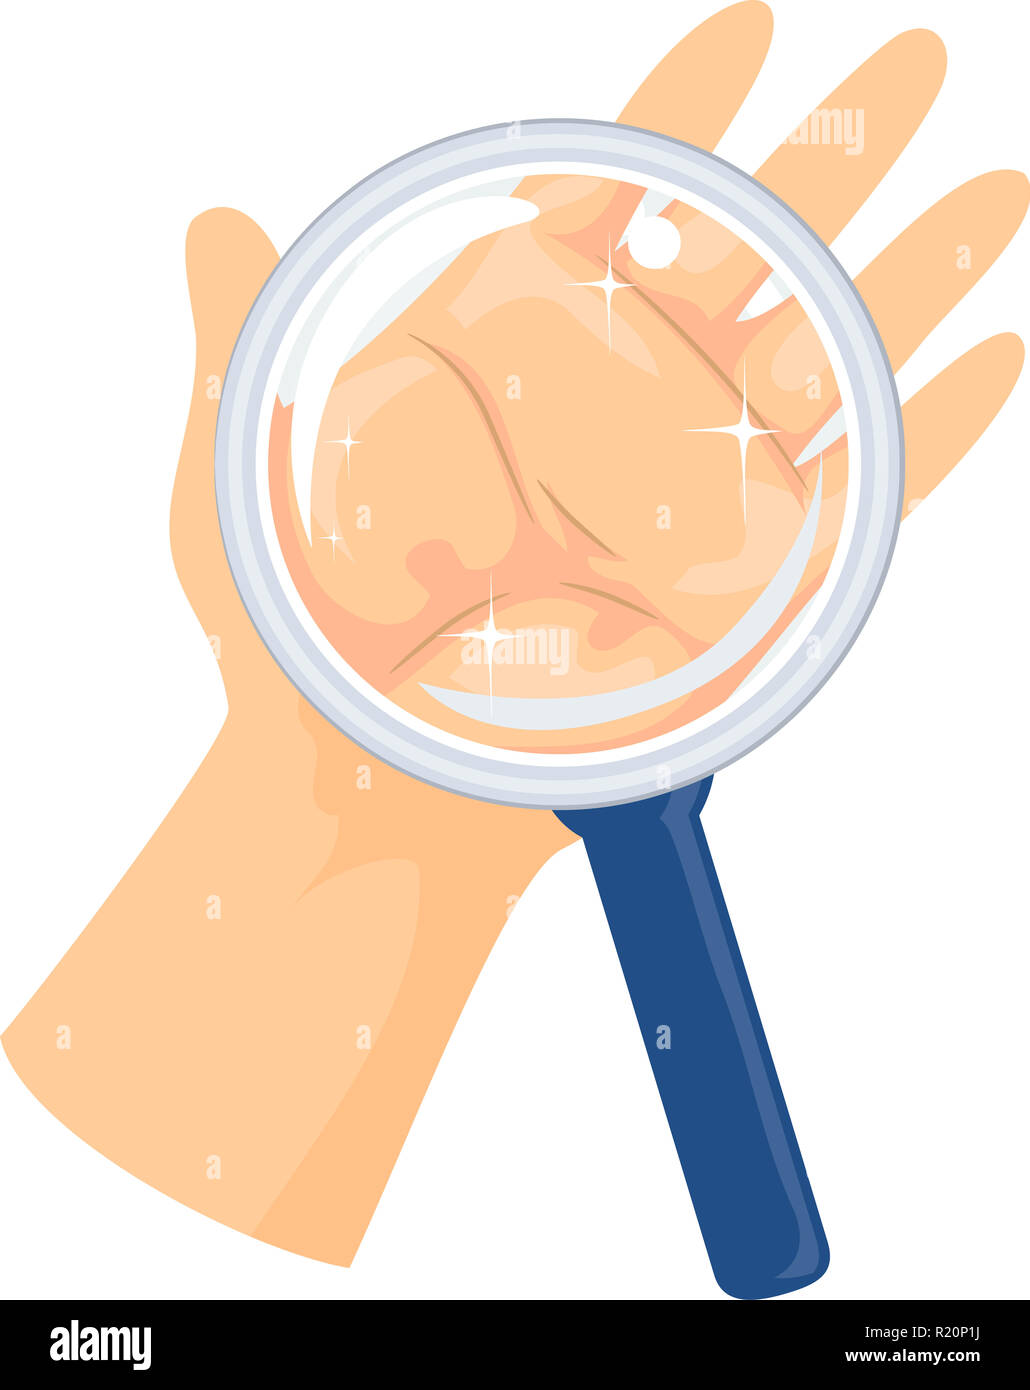 Illustration of a Magnifying Glass Over a Hand, Showing a Germ Free Hand Stock Photo